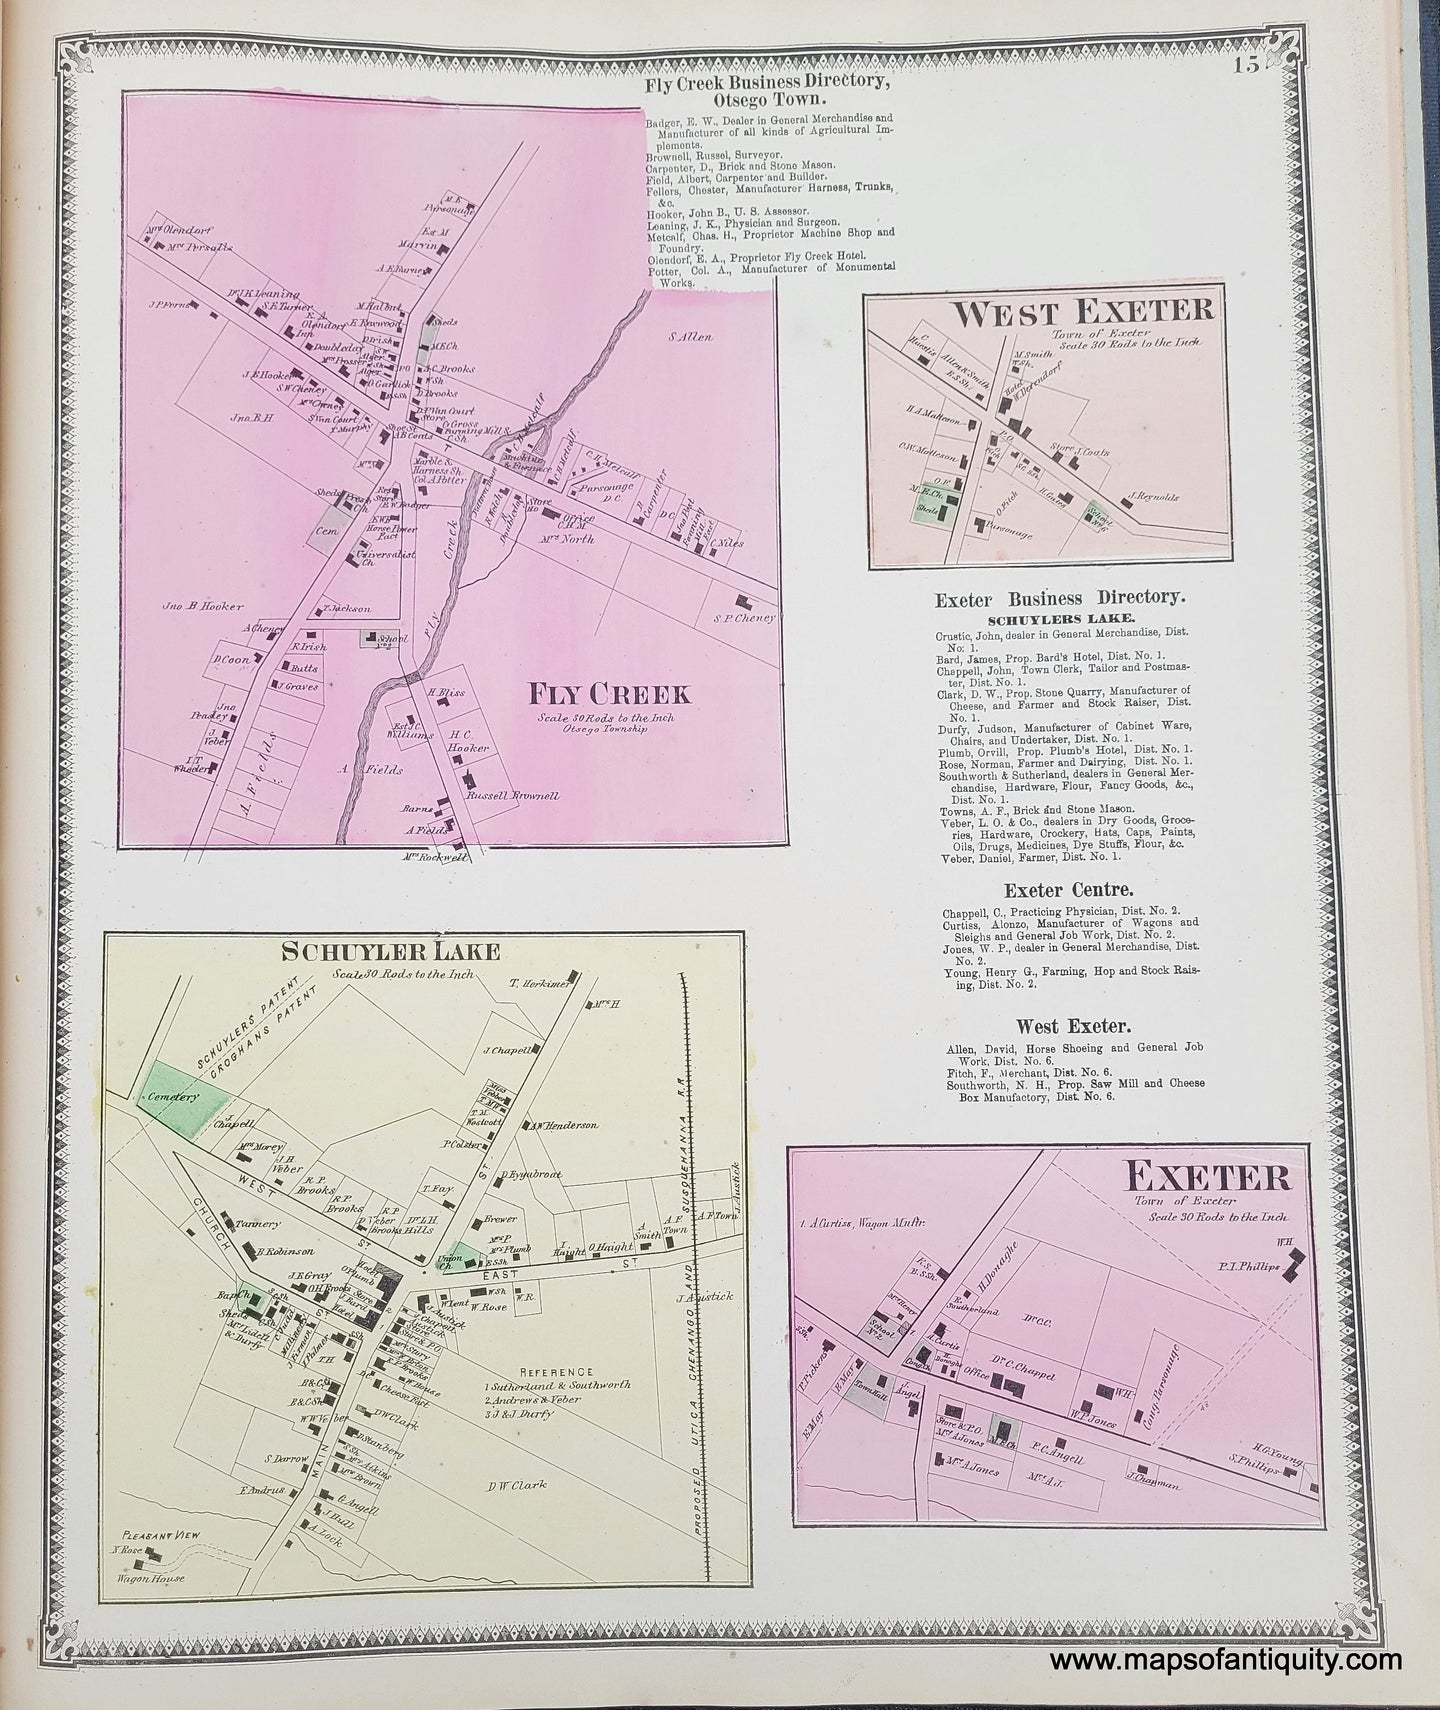 Genuine-Antique-Map-Fly-Creek-Otsego-Township--Schuyler-Lake-West-Exeter-Exeter-Otsego-Co-NY-1868-Beers-Ellis-&-Soule-Maps-Of-Antiquity